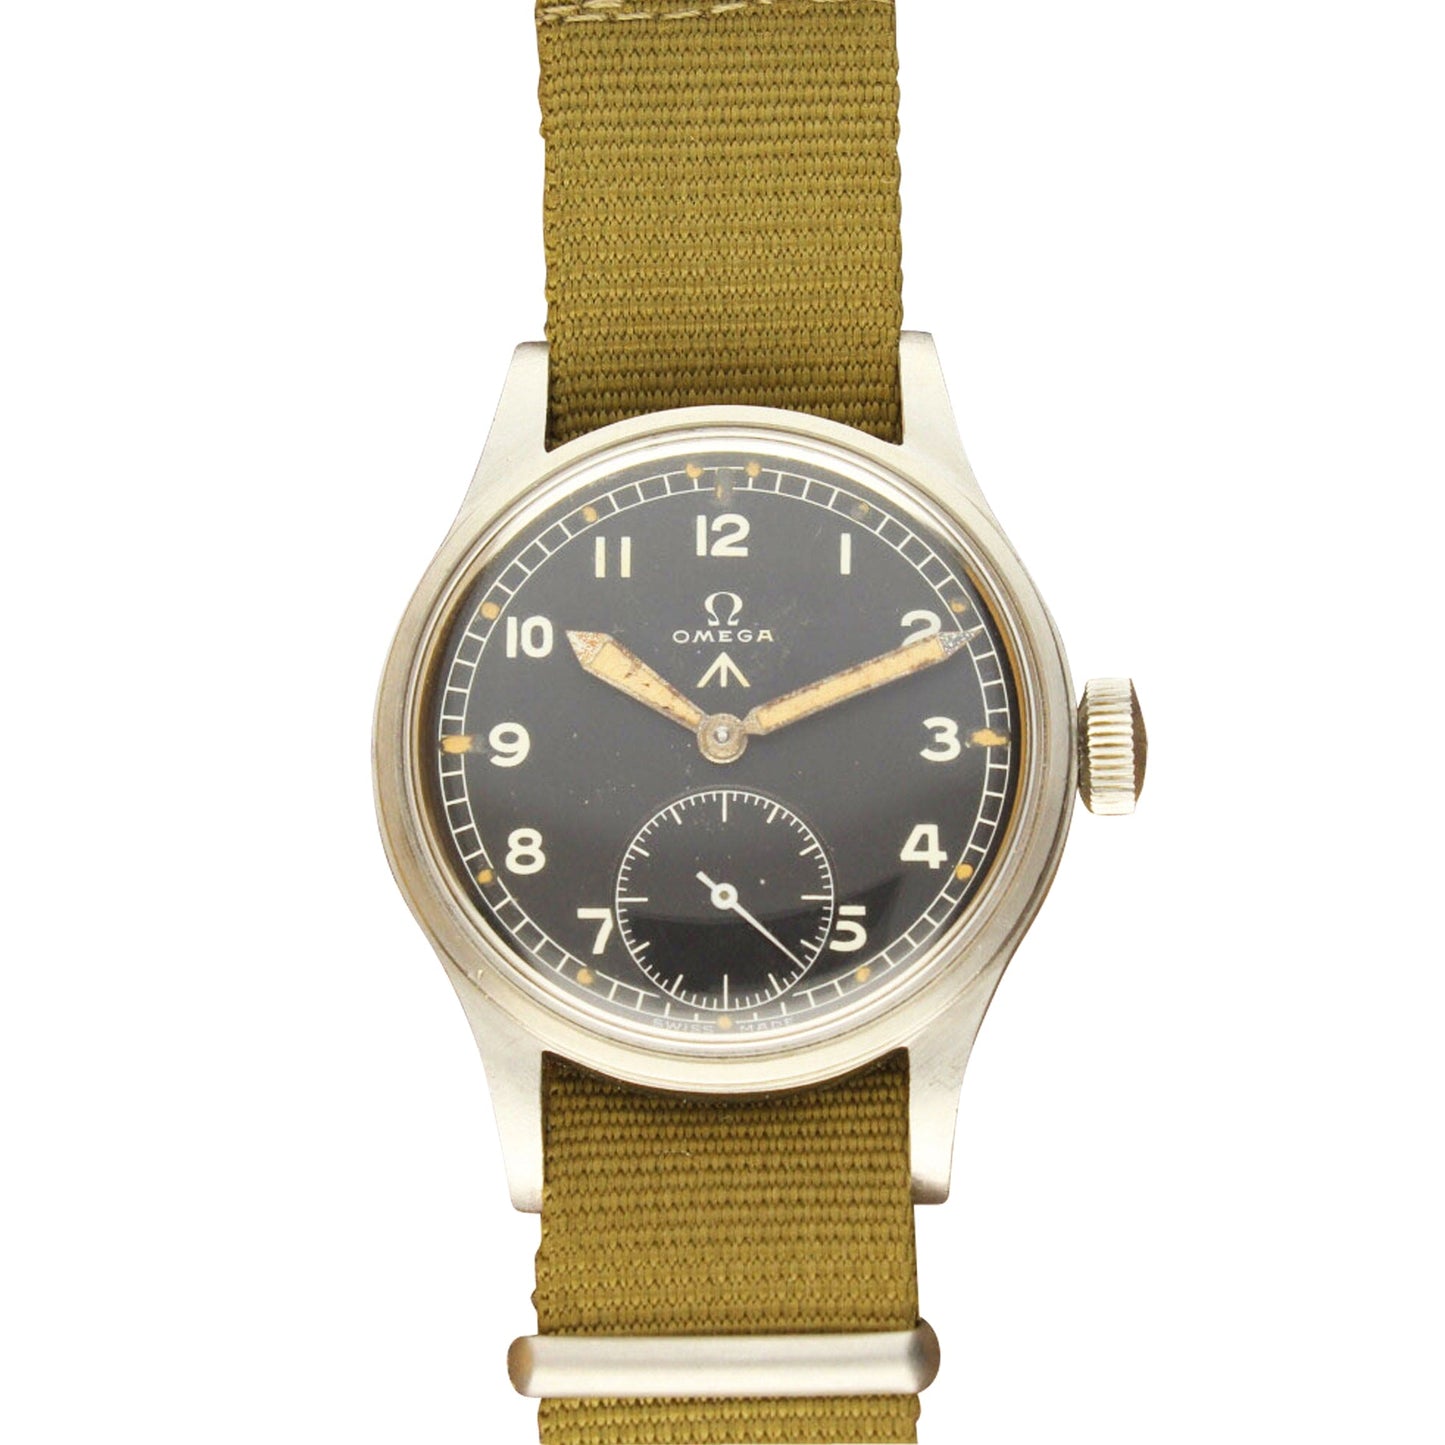 Stainless steel British military watch, part of the "Dirty dozen". Made 1949